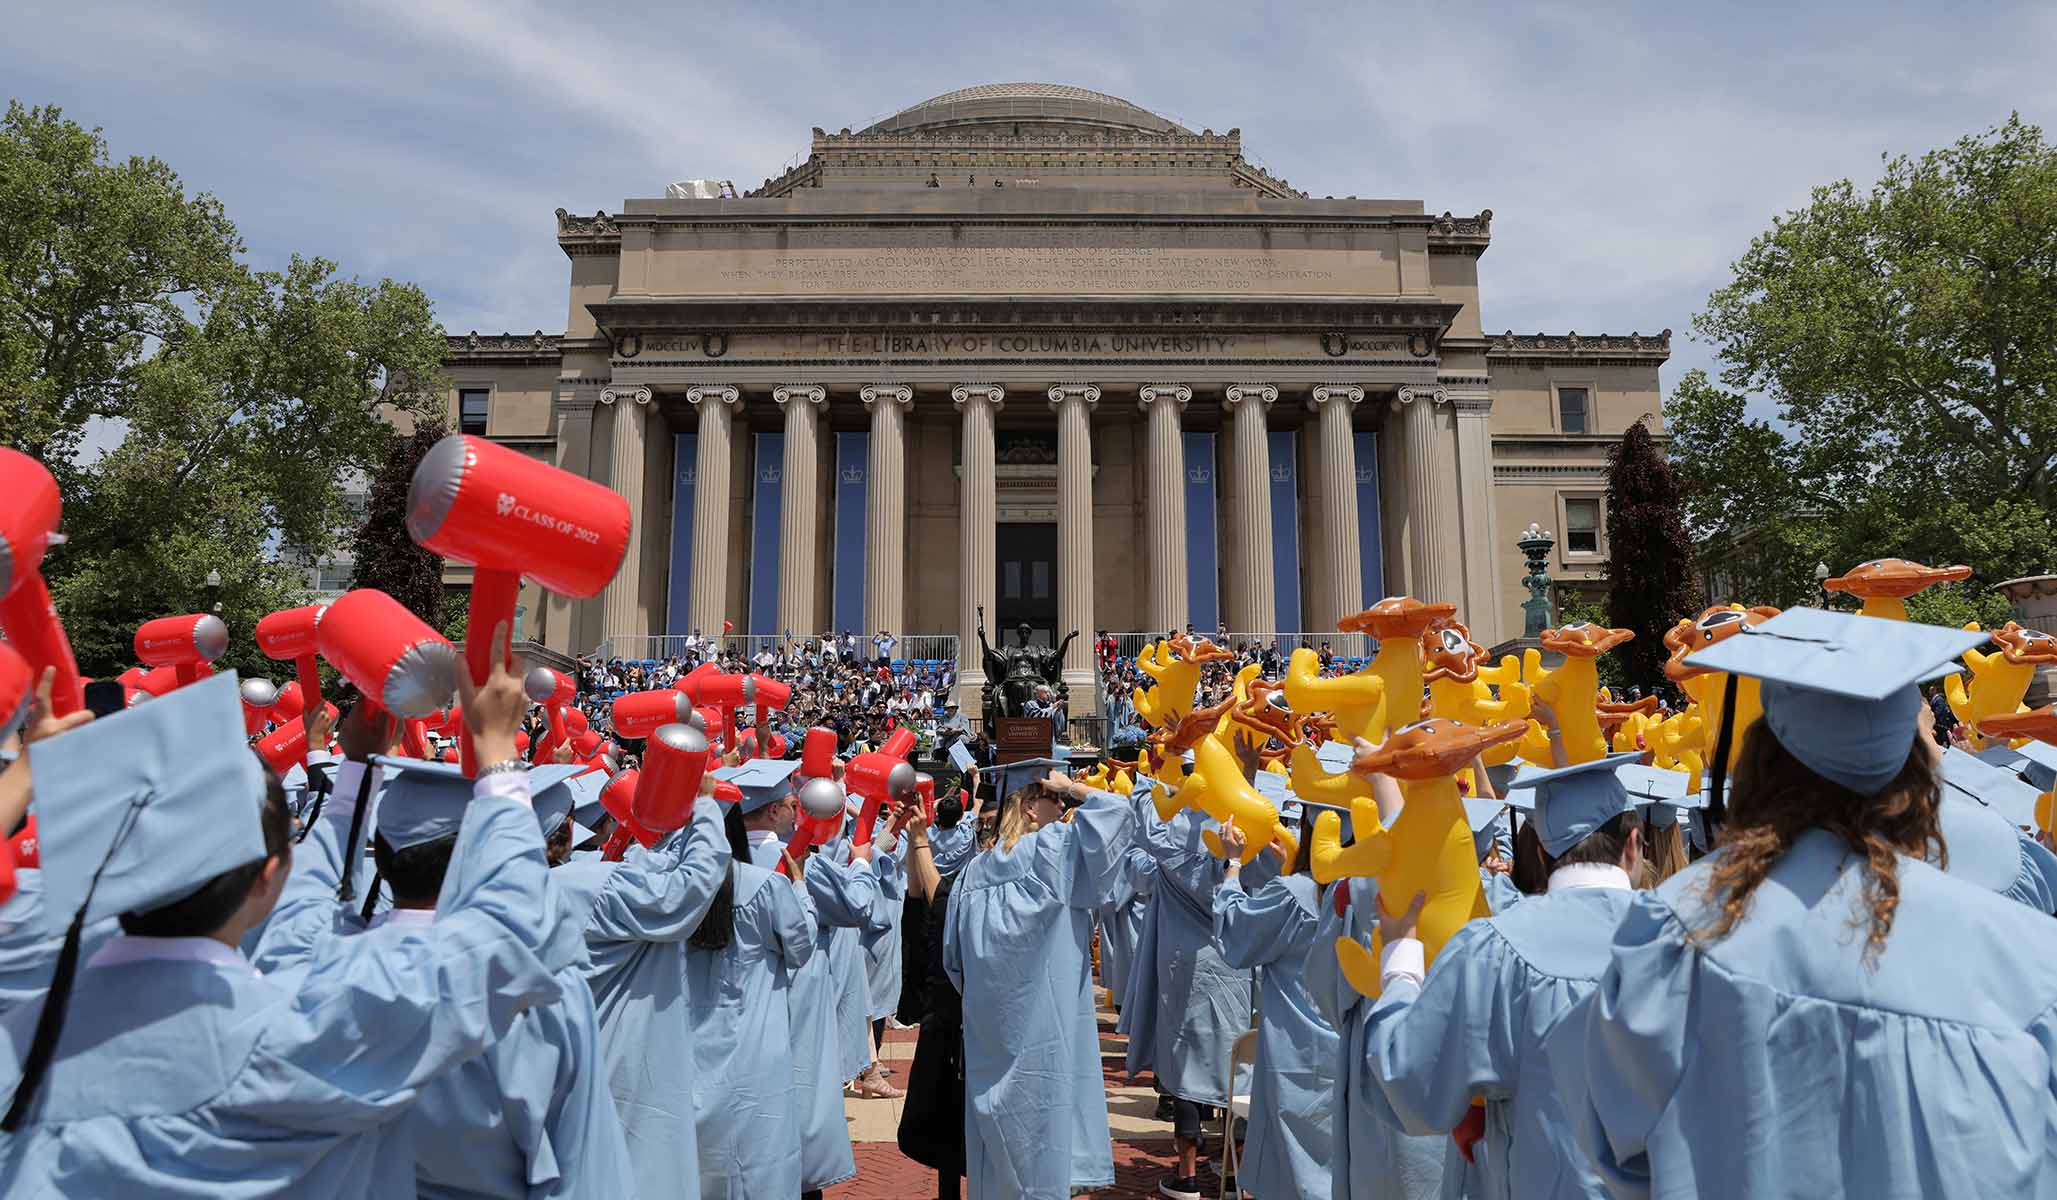 Columbia, UPenn among Worst Colleges for Free Speech, Report Finds